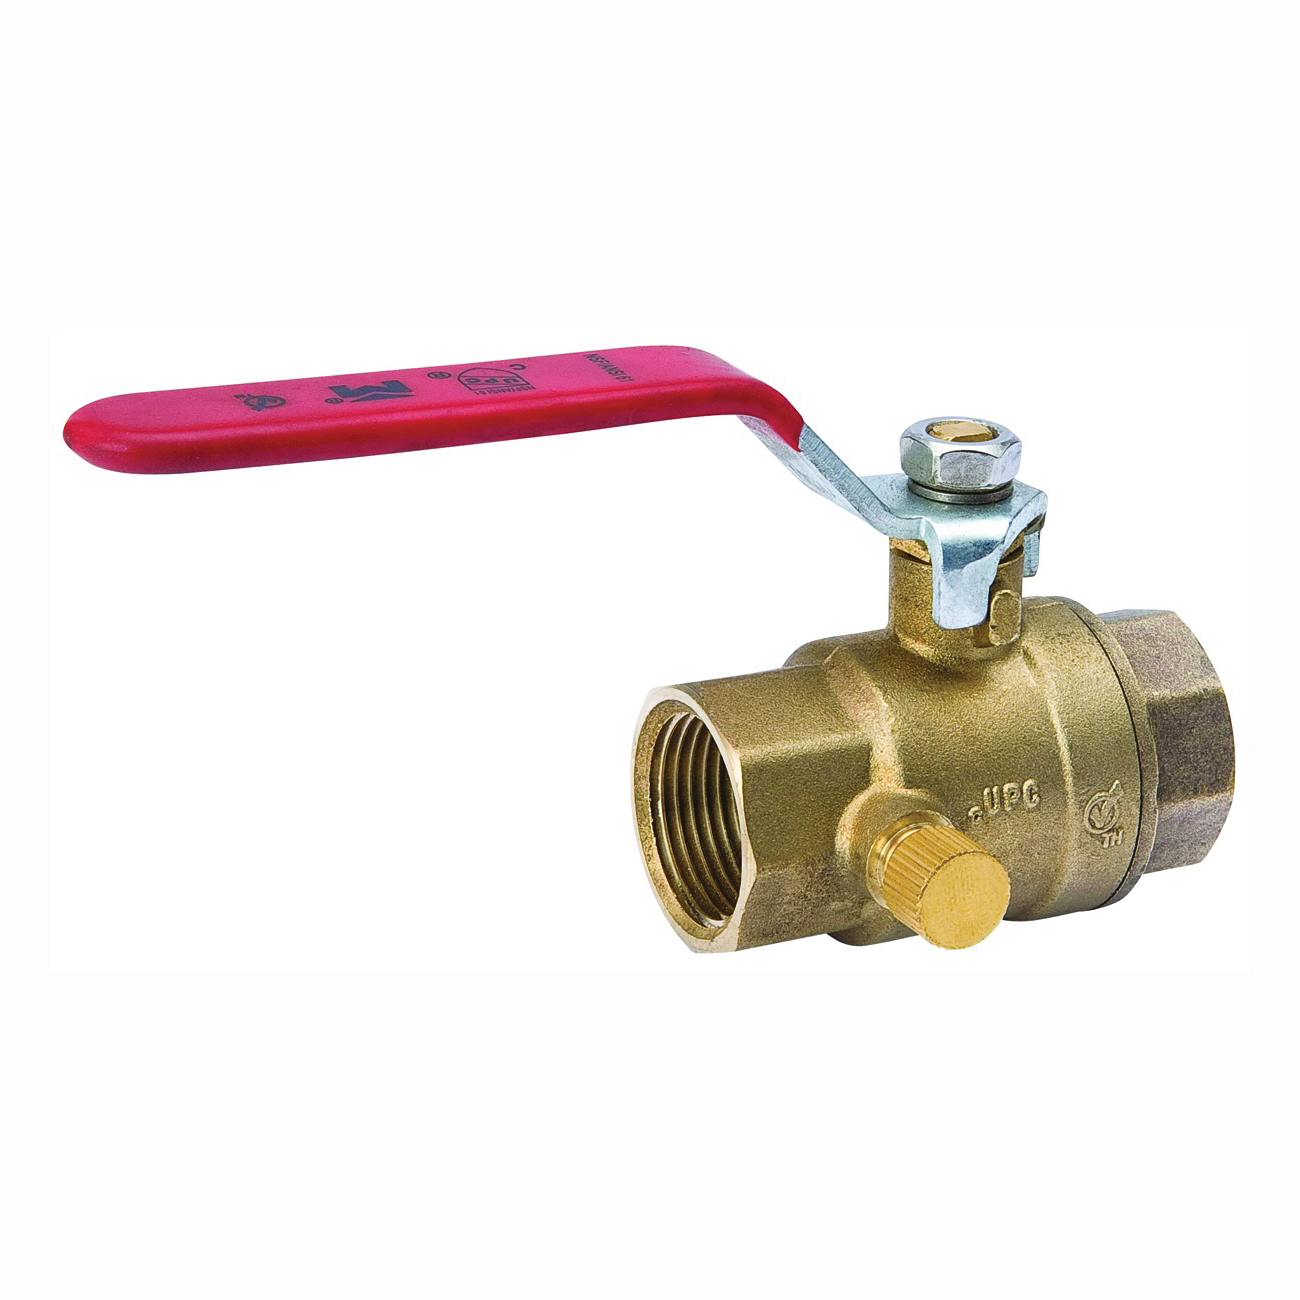 107-755NL Ball Valve, 1 in Connection, FPT x FPT, 500 psi Pressure, Brass Body